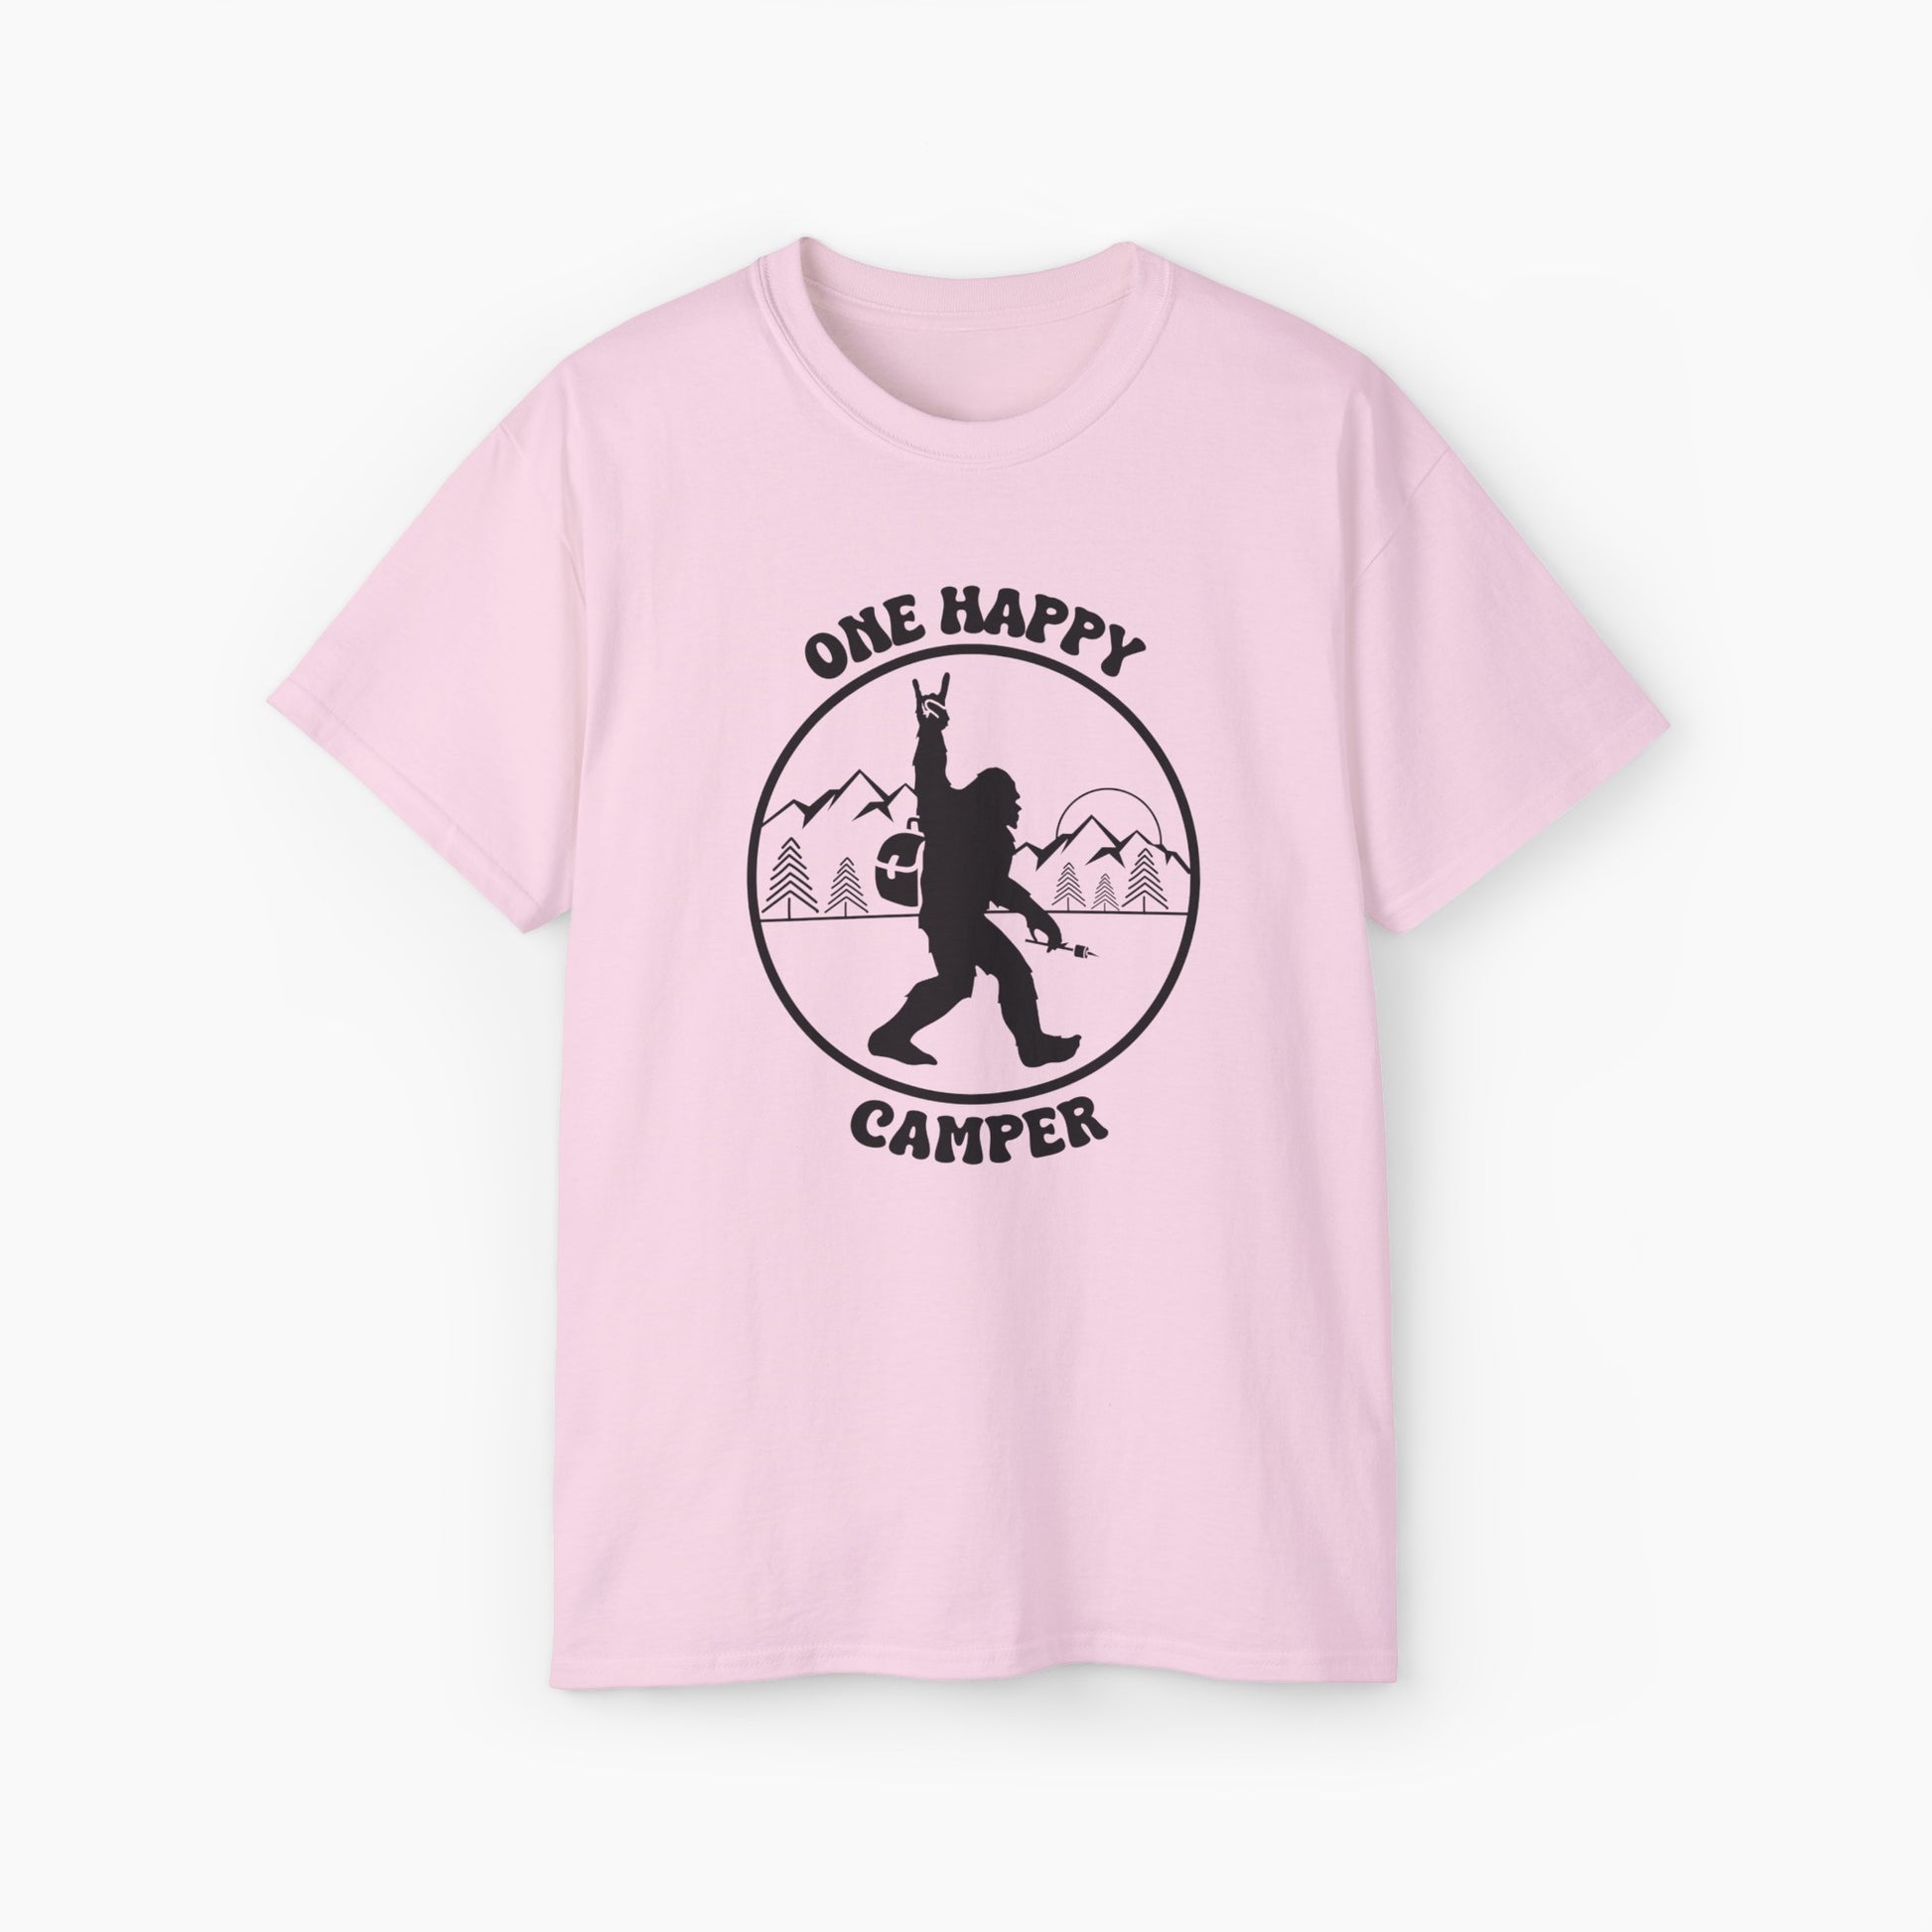 Light pink t-shirt with 'One Happy Camper' text, featuring Bigfoot making a peace sign, set against a subtle background of trees and mountains.